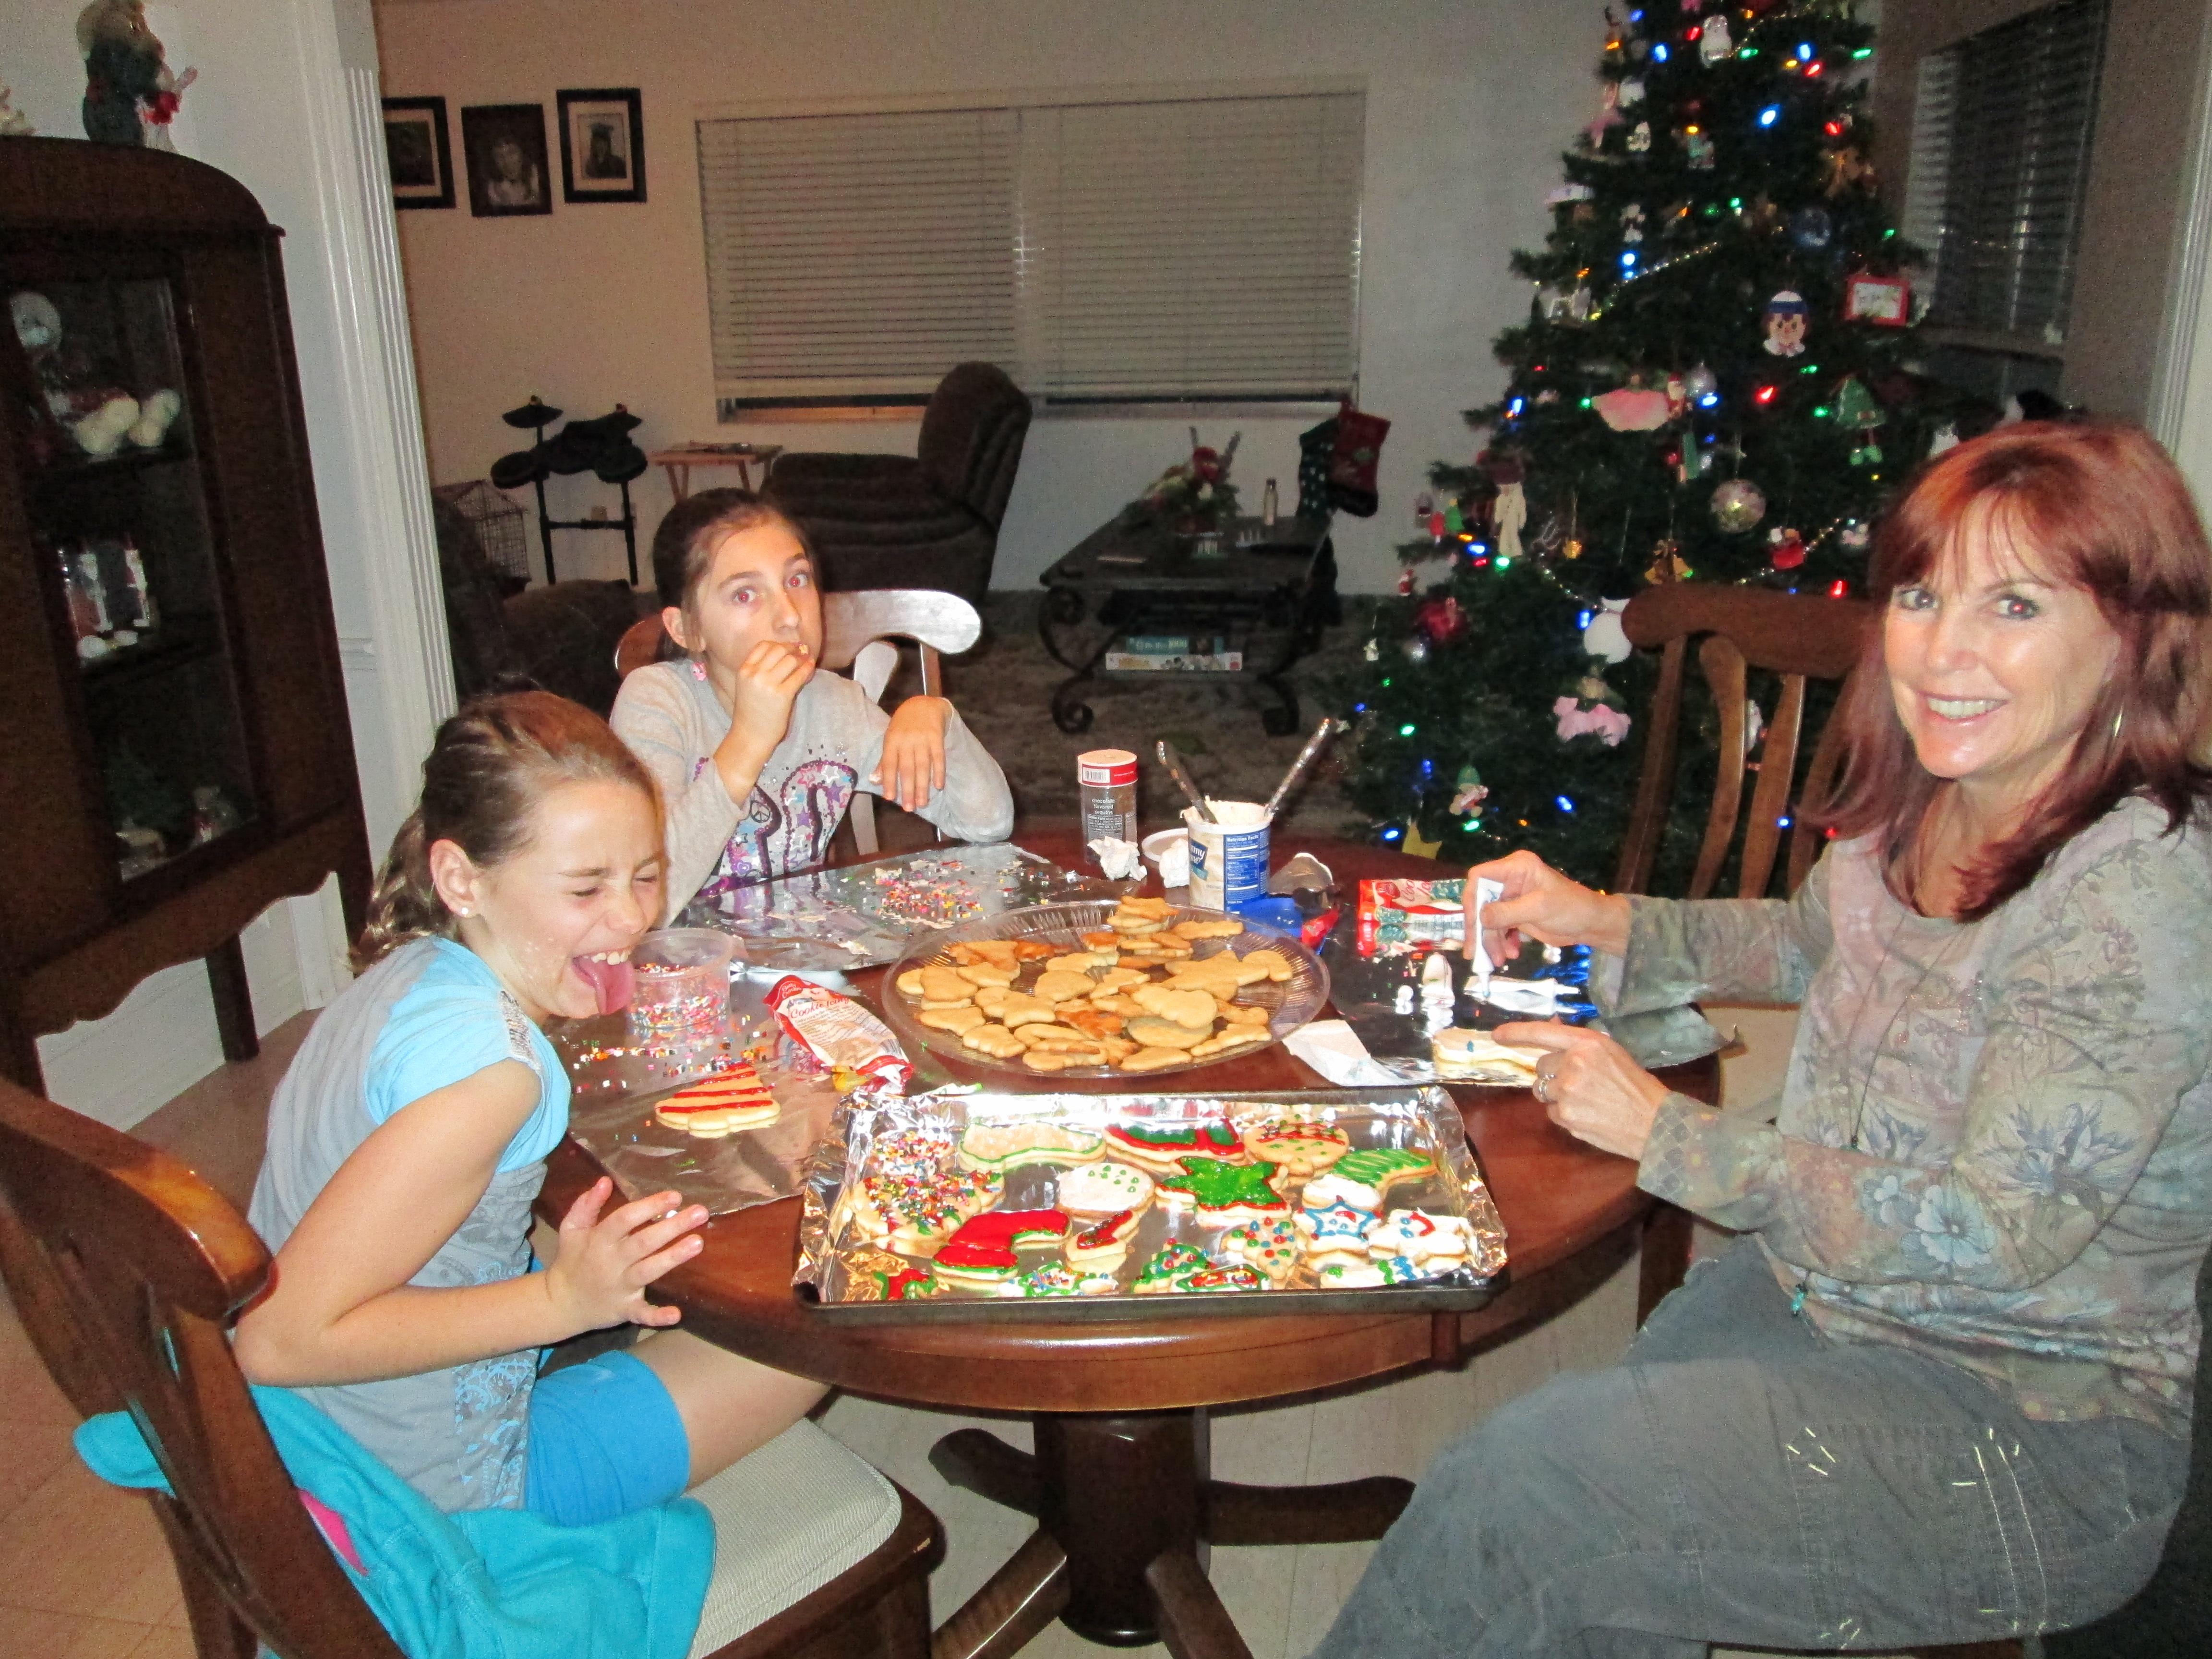 Decorating Christmas cookies with our girls.